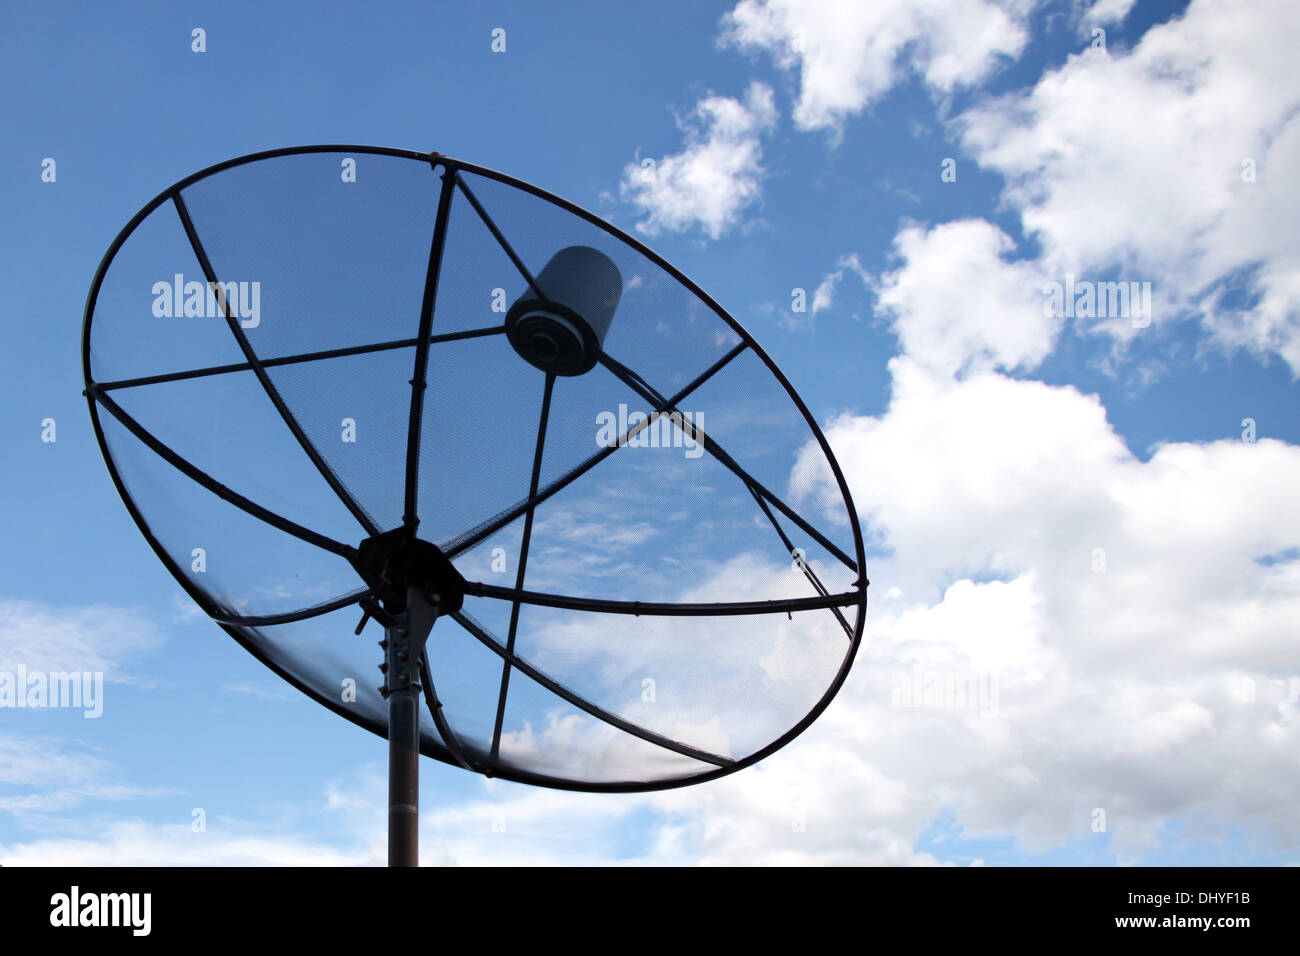 The Picture Satellite dish and Clouds on Blue sky. Stock Photo